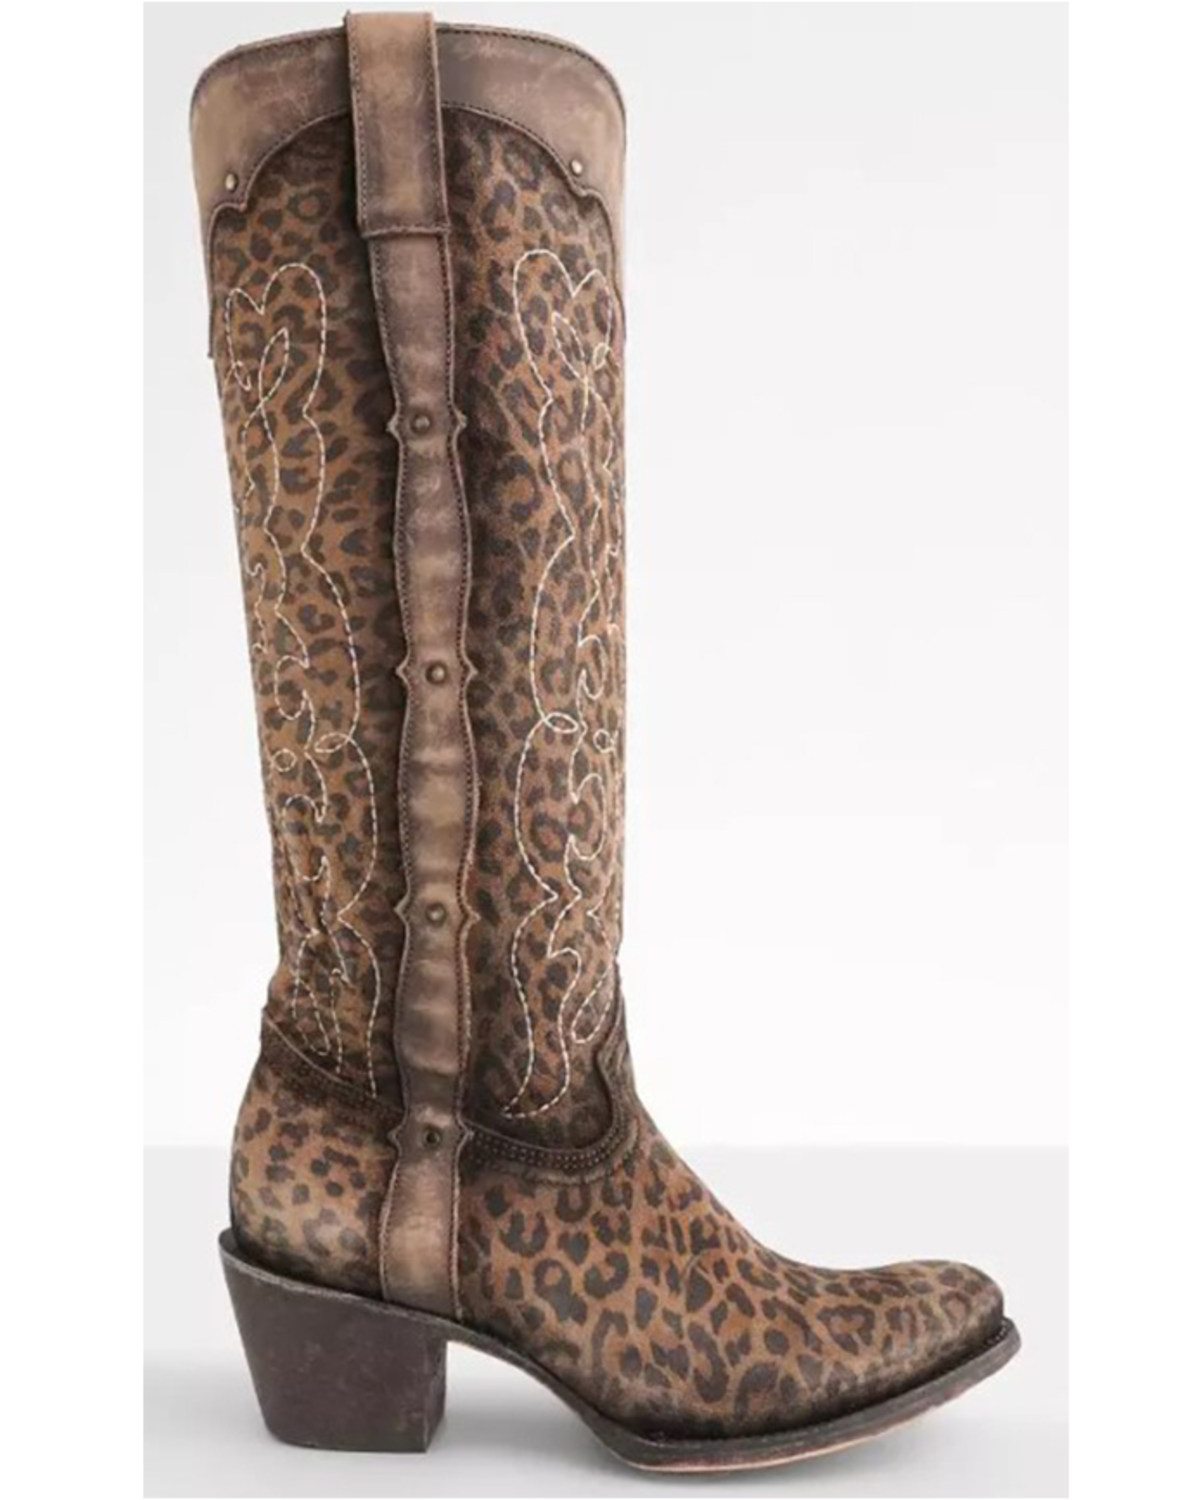 Corral Women's Leopard Print Western Boots - Round Toe